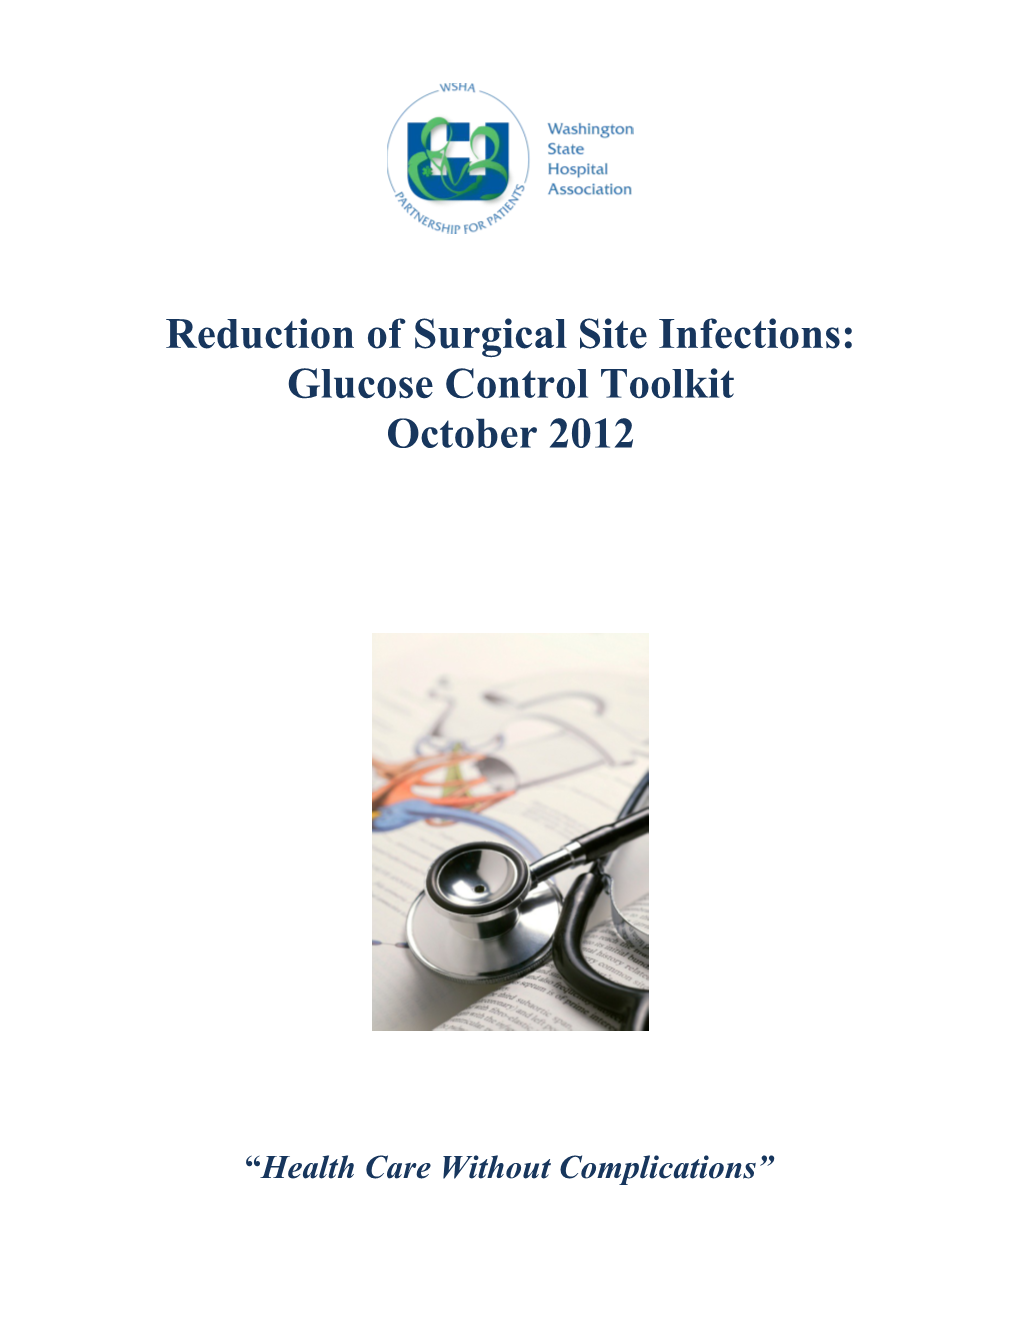 Reduction of Surgical Site Infections: Glucose Controltoolkit